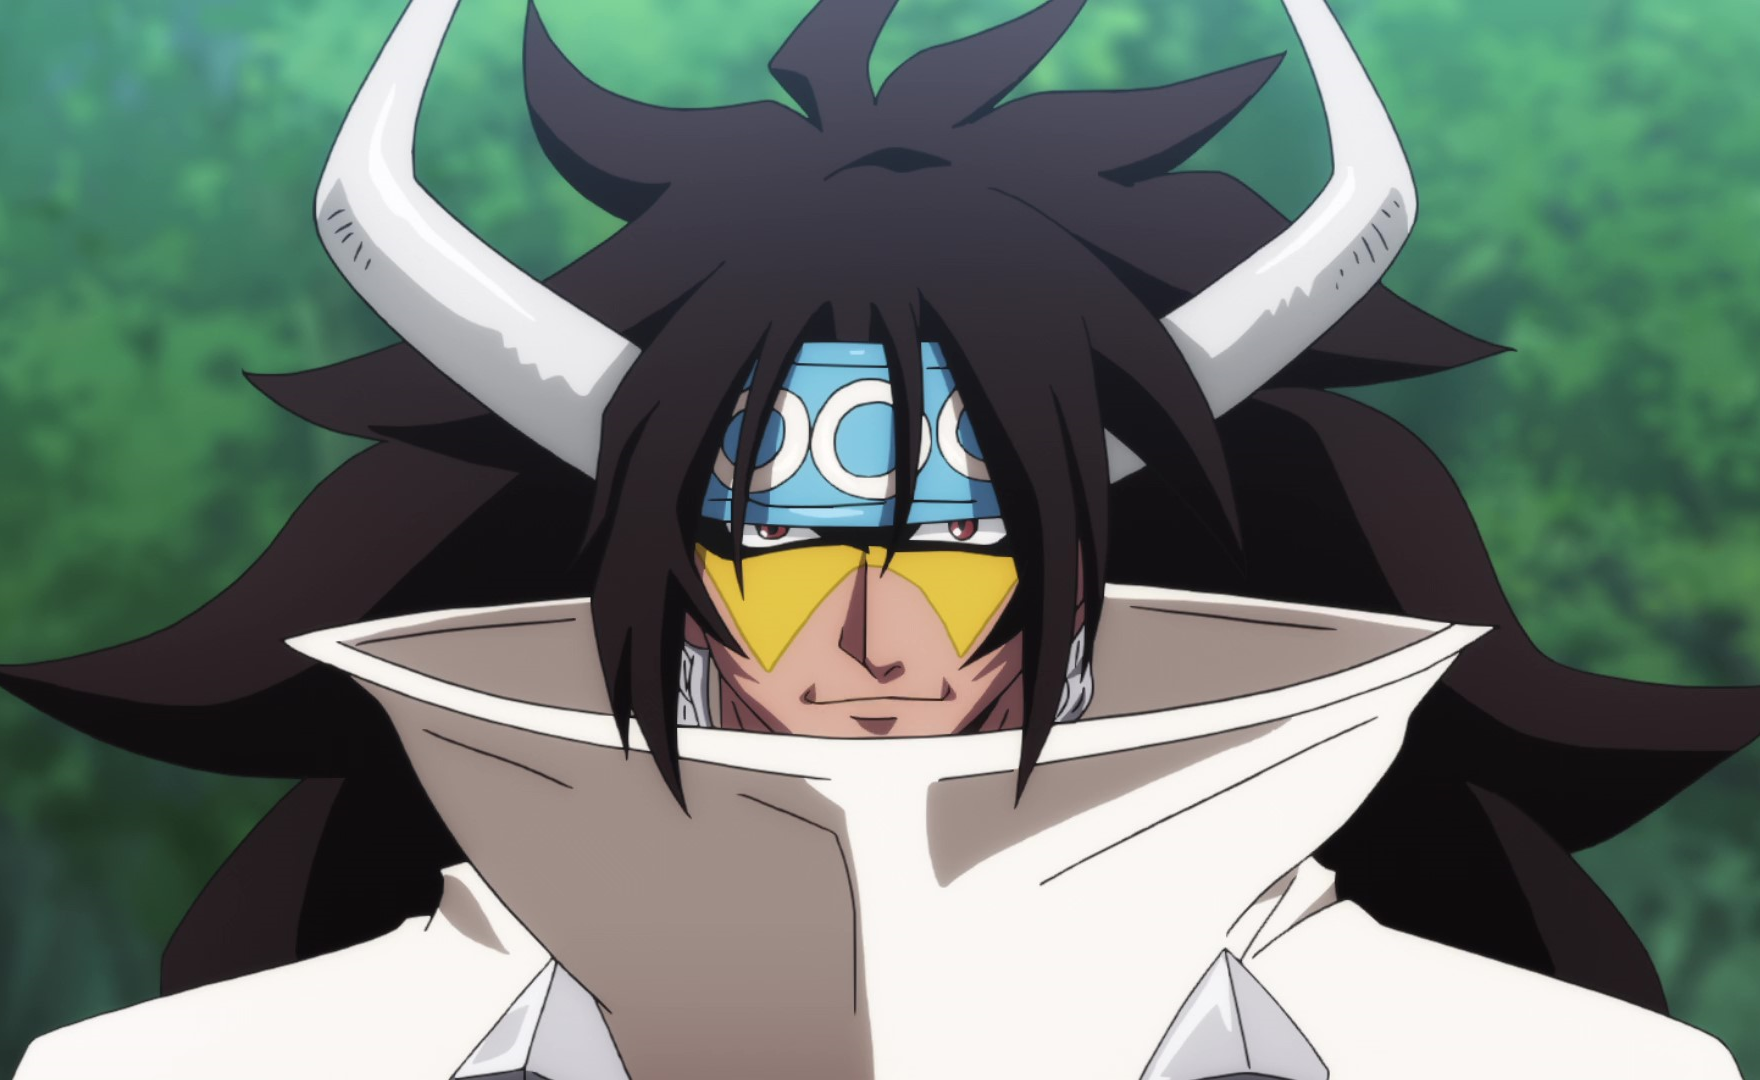 Shaman King: 5 Major Differences The Original Anime Had With The